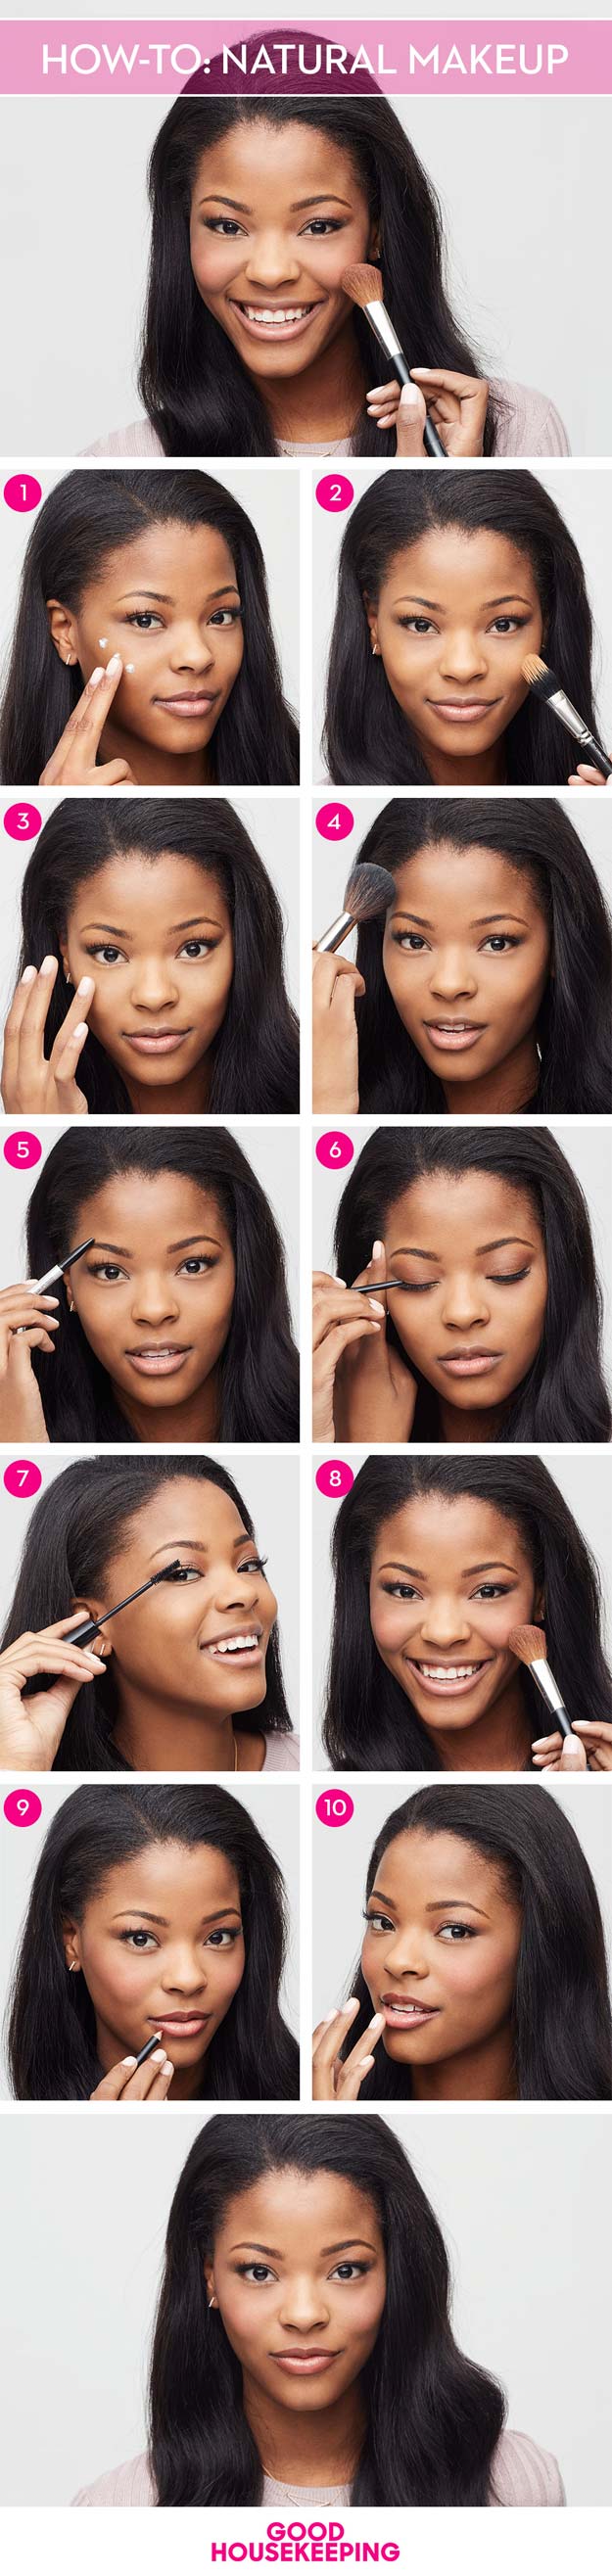 Best Makeup Tutorials for Teens -How to Master the All-Natural Look - Easy Makeup Ideas for Beginners - Step by Step Tutorials for Foundation, Eye Shadow, Lipstick, Cheeks, Contour, Eyebrows and Eyes - Awesome Makeup Hacks and Tips for Simple DIY Beauty - Day and Evening Looks 